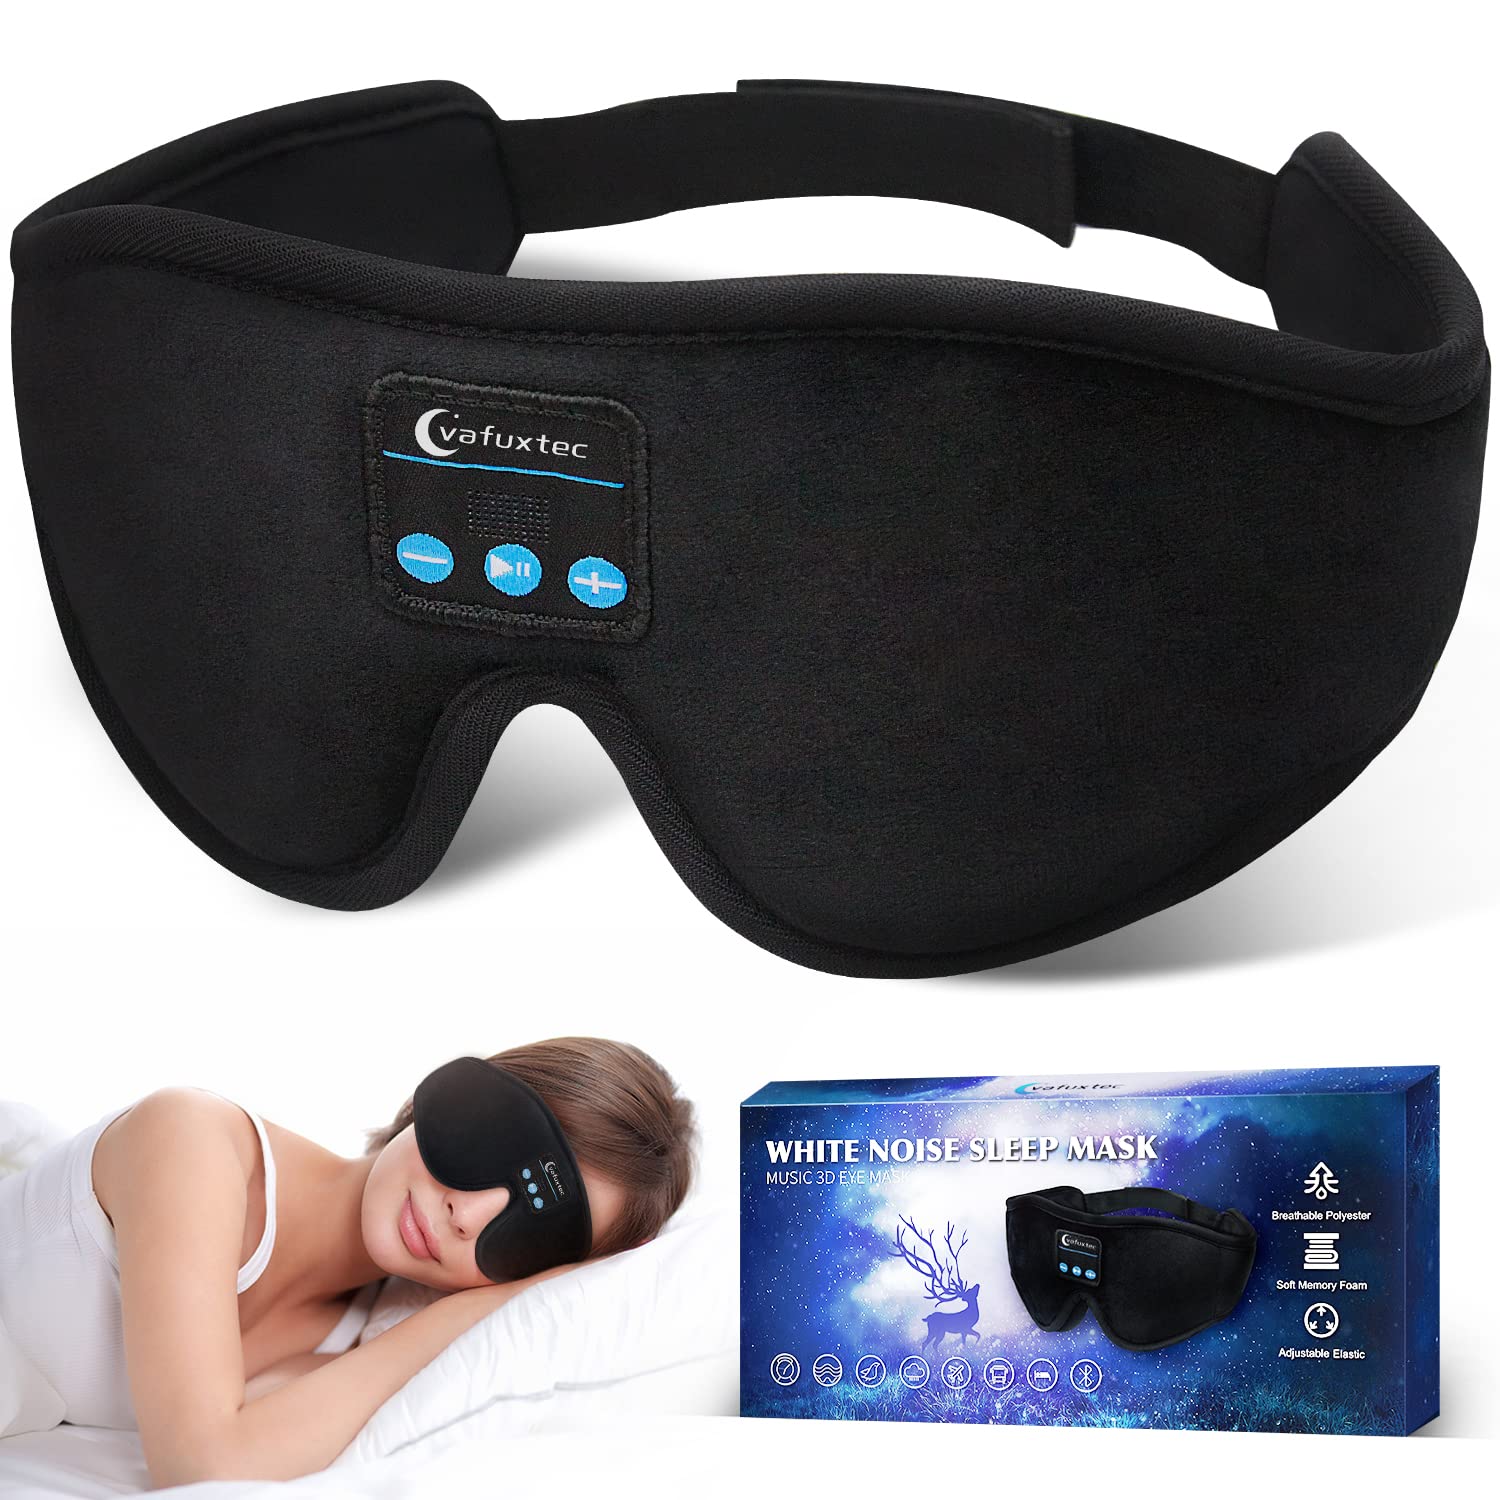  Sleep Headphone, Bluetooth Wireless White Noise Sleeping Eye  Mask,3D Breathable Sleep Mask with Timer for Sleeping Travel Relaxation,  Meditation, Cool Gadgets for Women Man : Health & Household